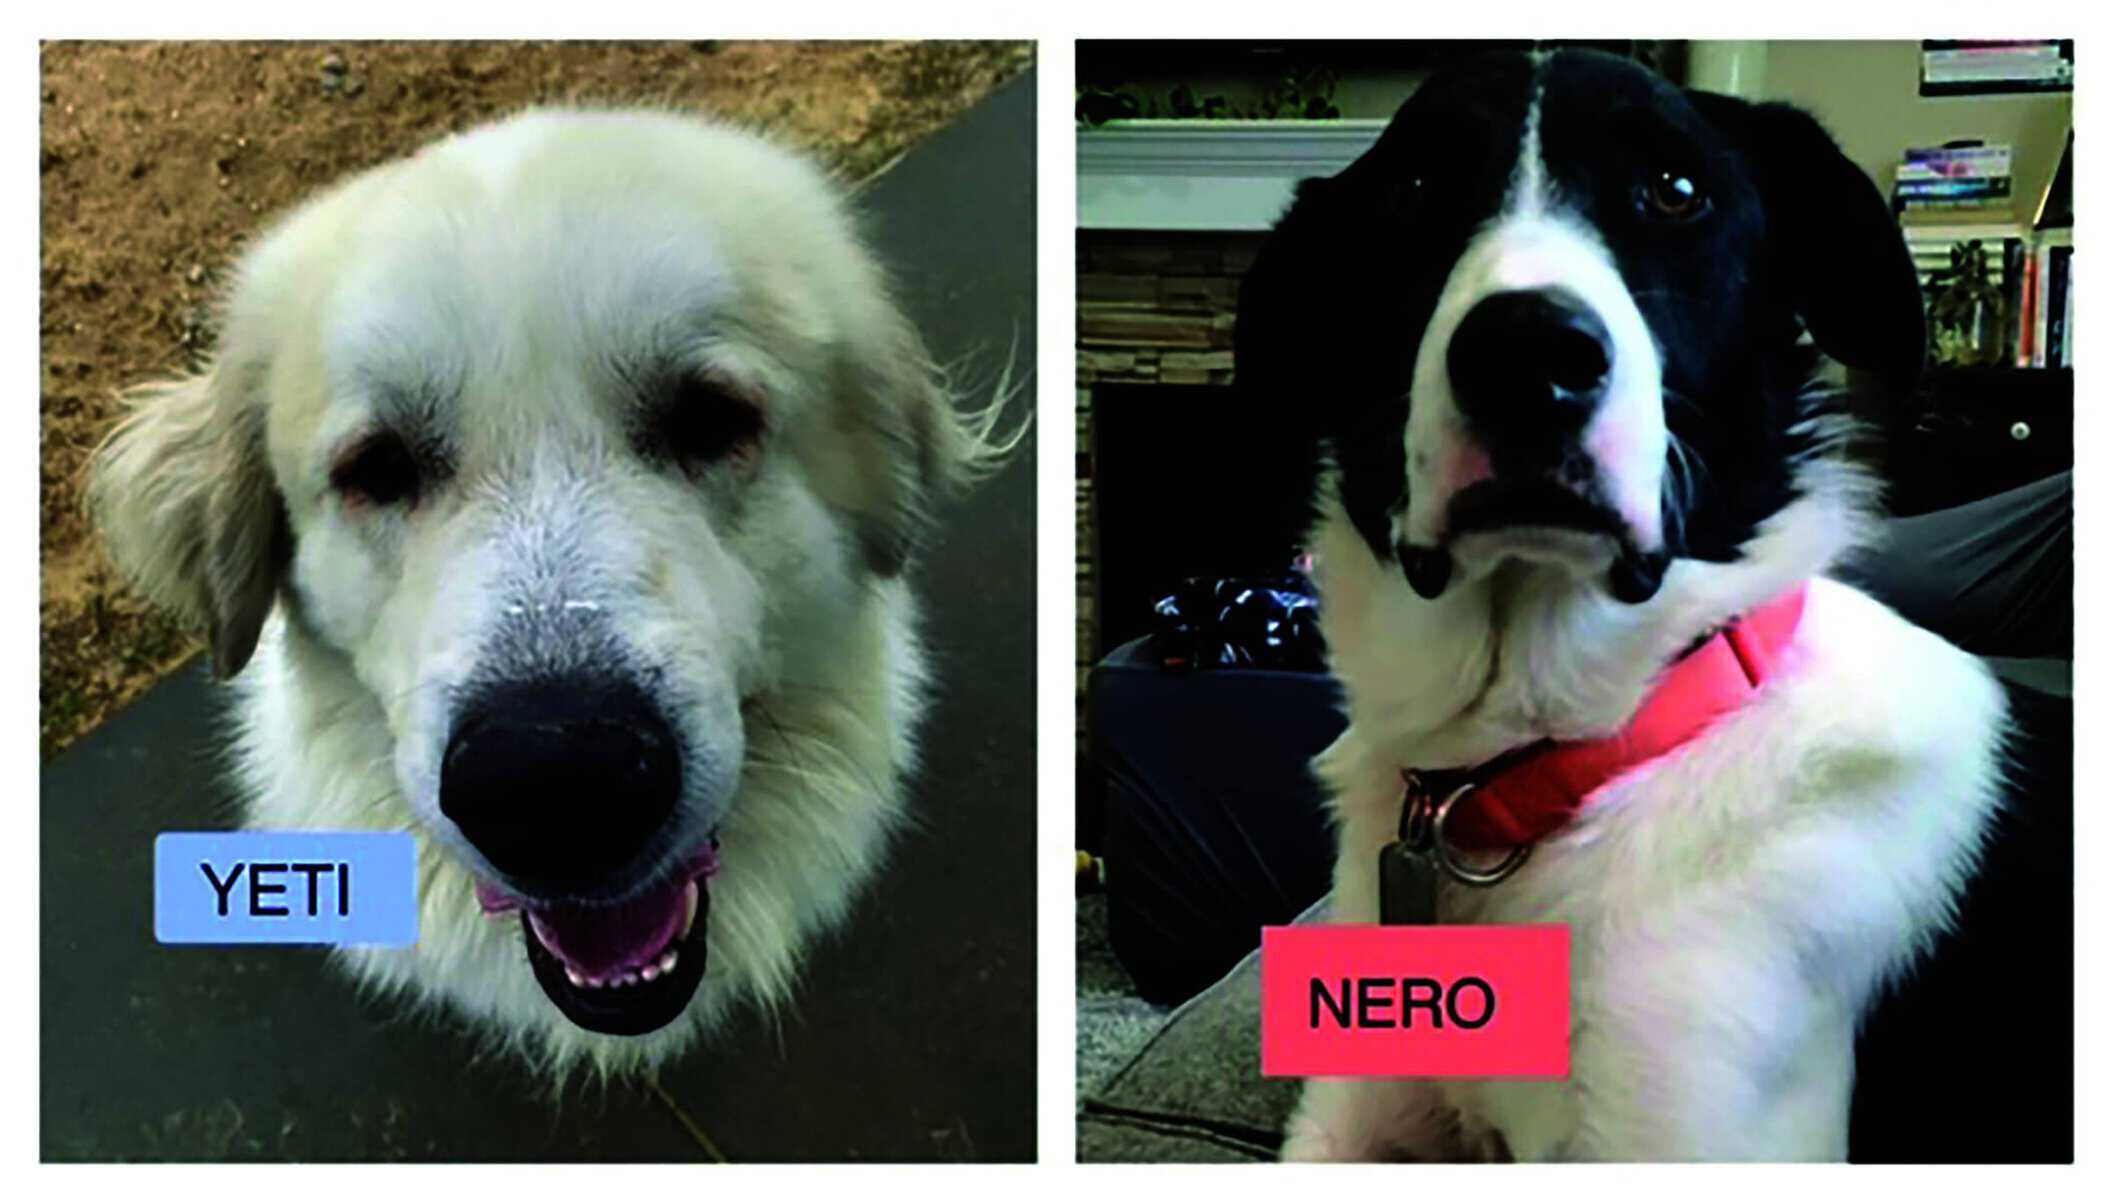 Two side-by-side photos of dogs named yeti and nero; yeti is a fluffy, smiling golden retriever, and nero is a black and white dog with expressive eyes, wearing a red collar.